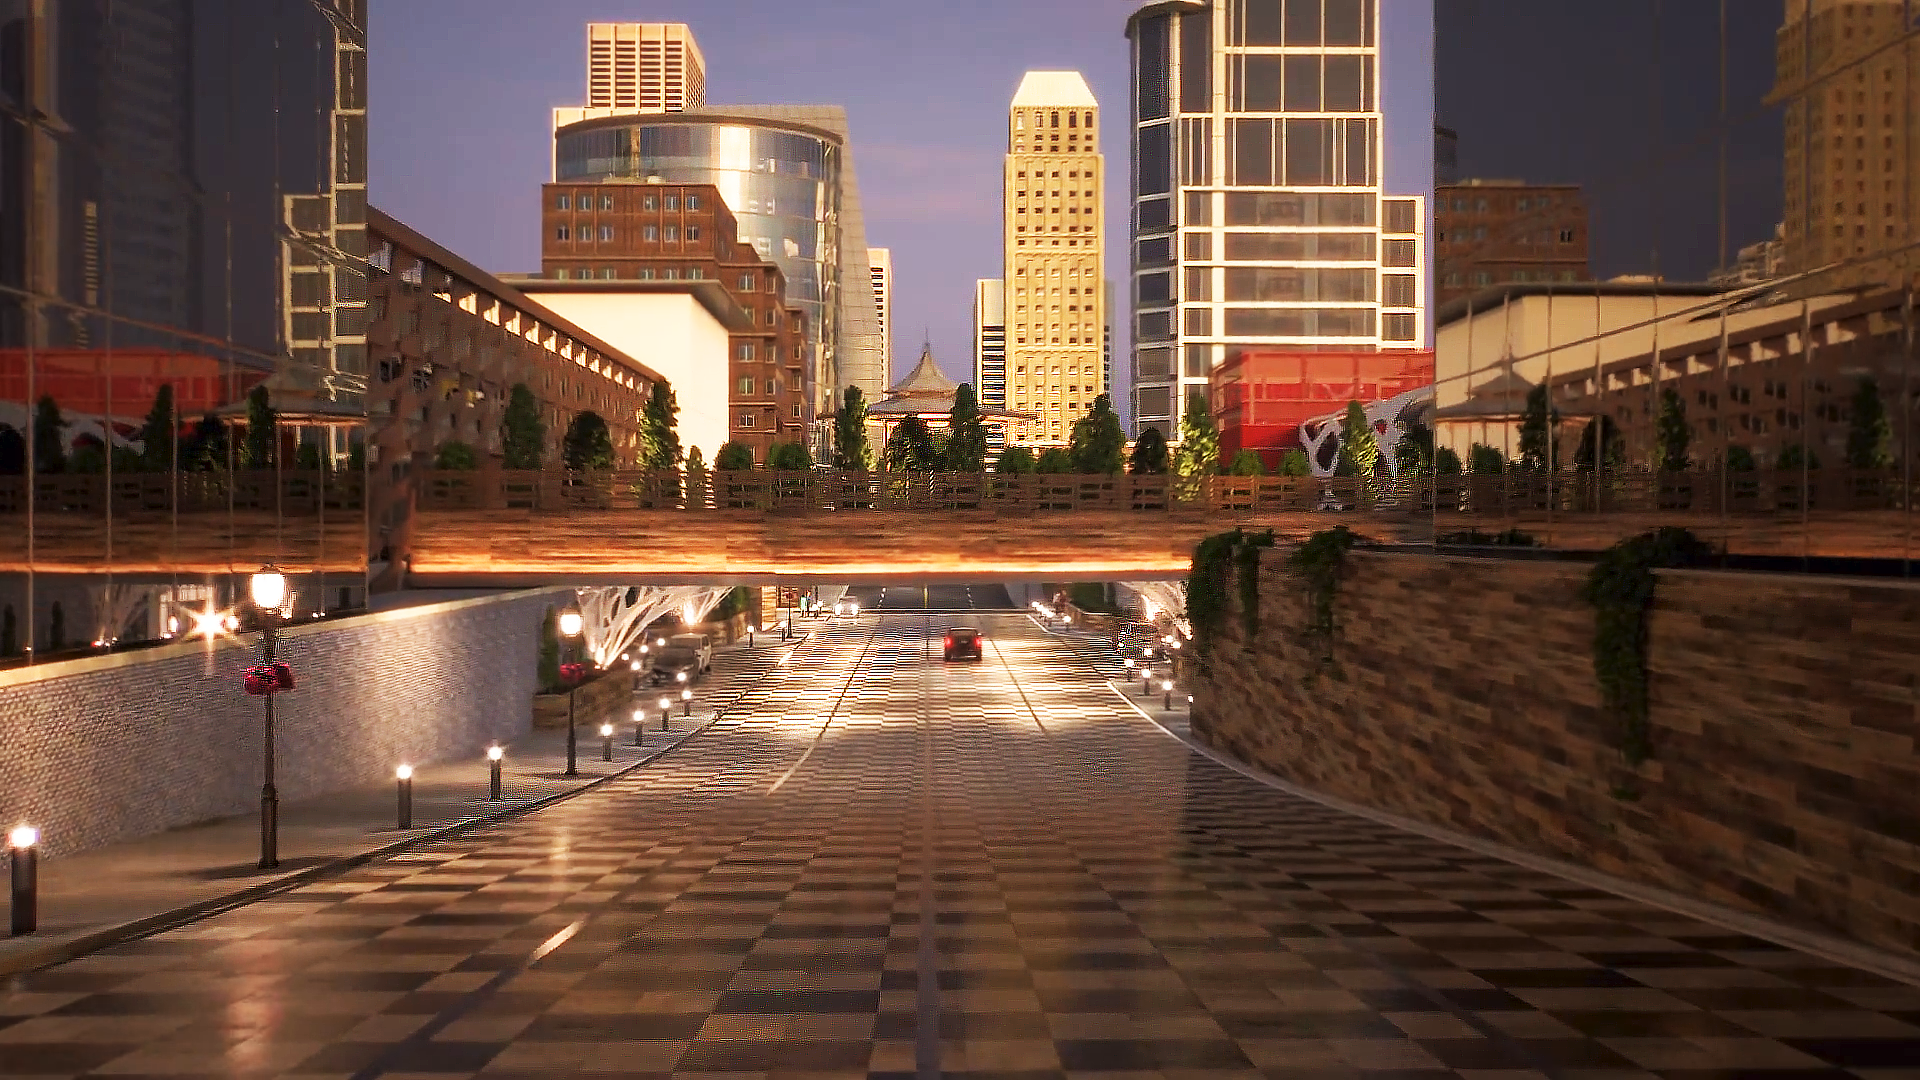 This is a 3D rendered image from Trinity's real estate renderings exhibiting the Summit Plaza Mall. The camera takes viewers on a journey through the realistic 3D modeled Summit Plaza Mall to experience the architecture at many different angles. This still image displays a beautifully rendered urban underpass which the camera eventually travels under in this scene.